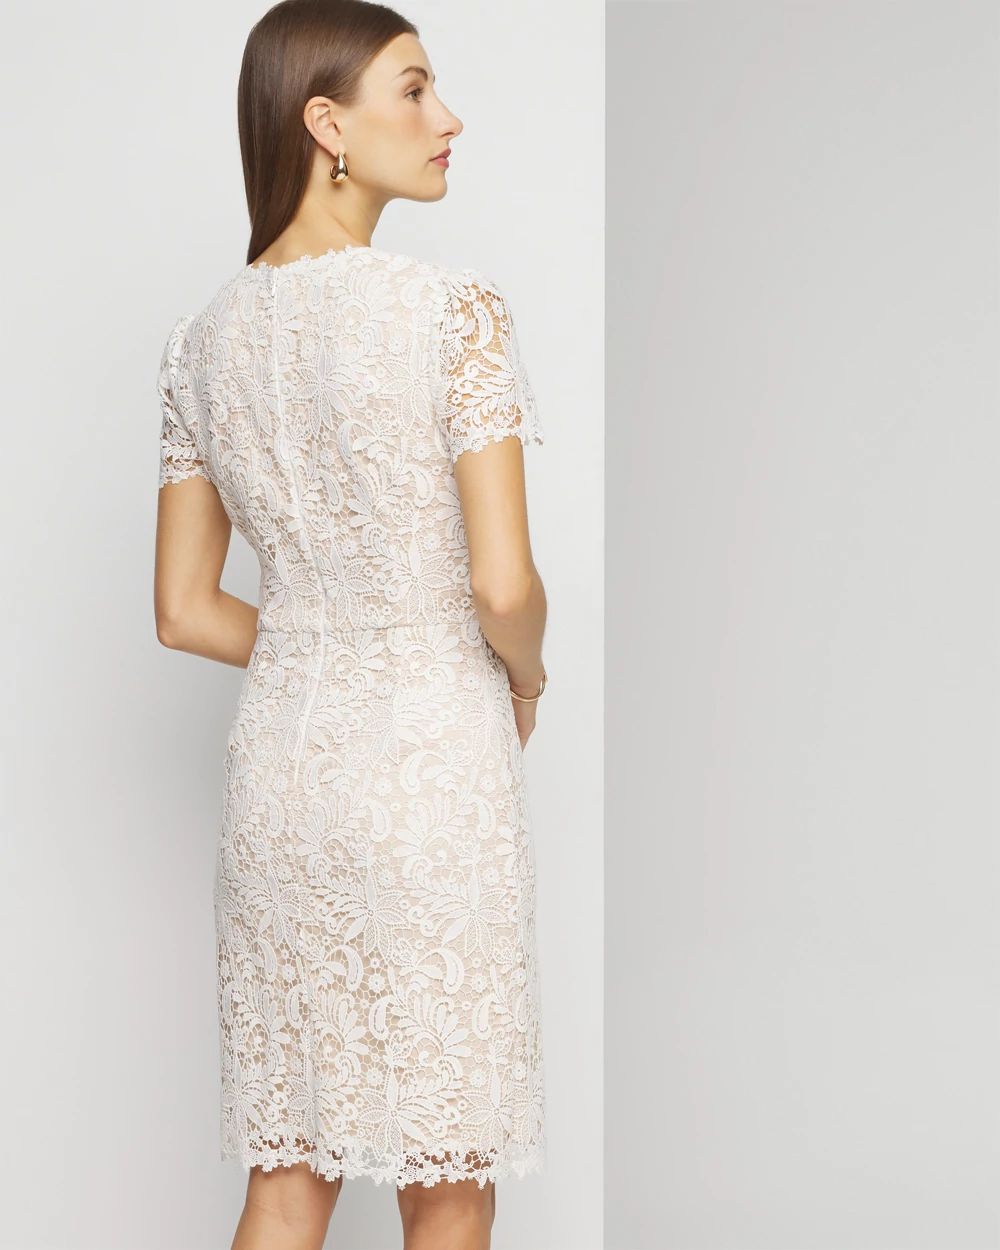 Short Sleeve V-Neck Lace Sheath Dress click to view larger image.